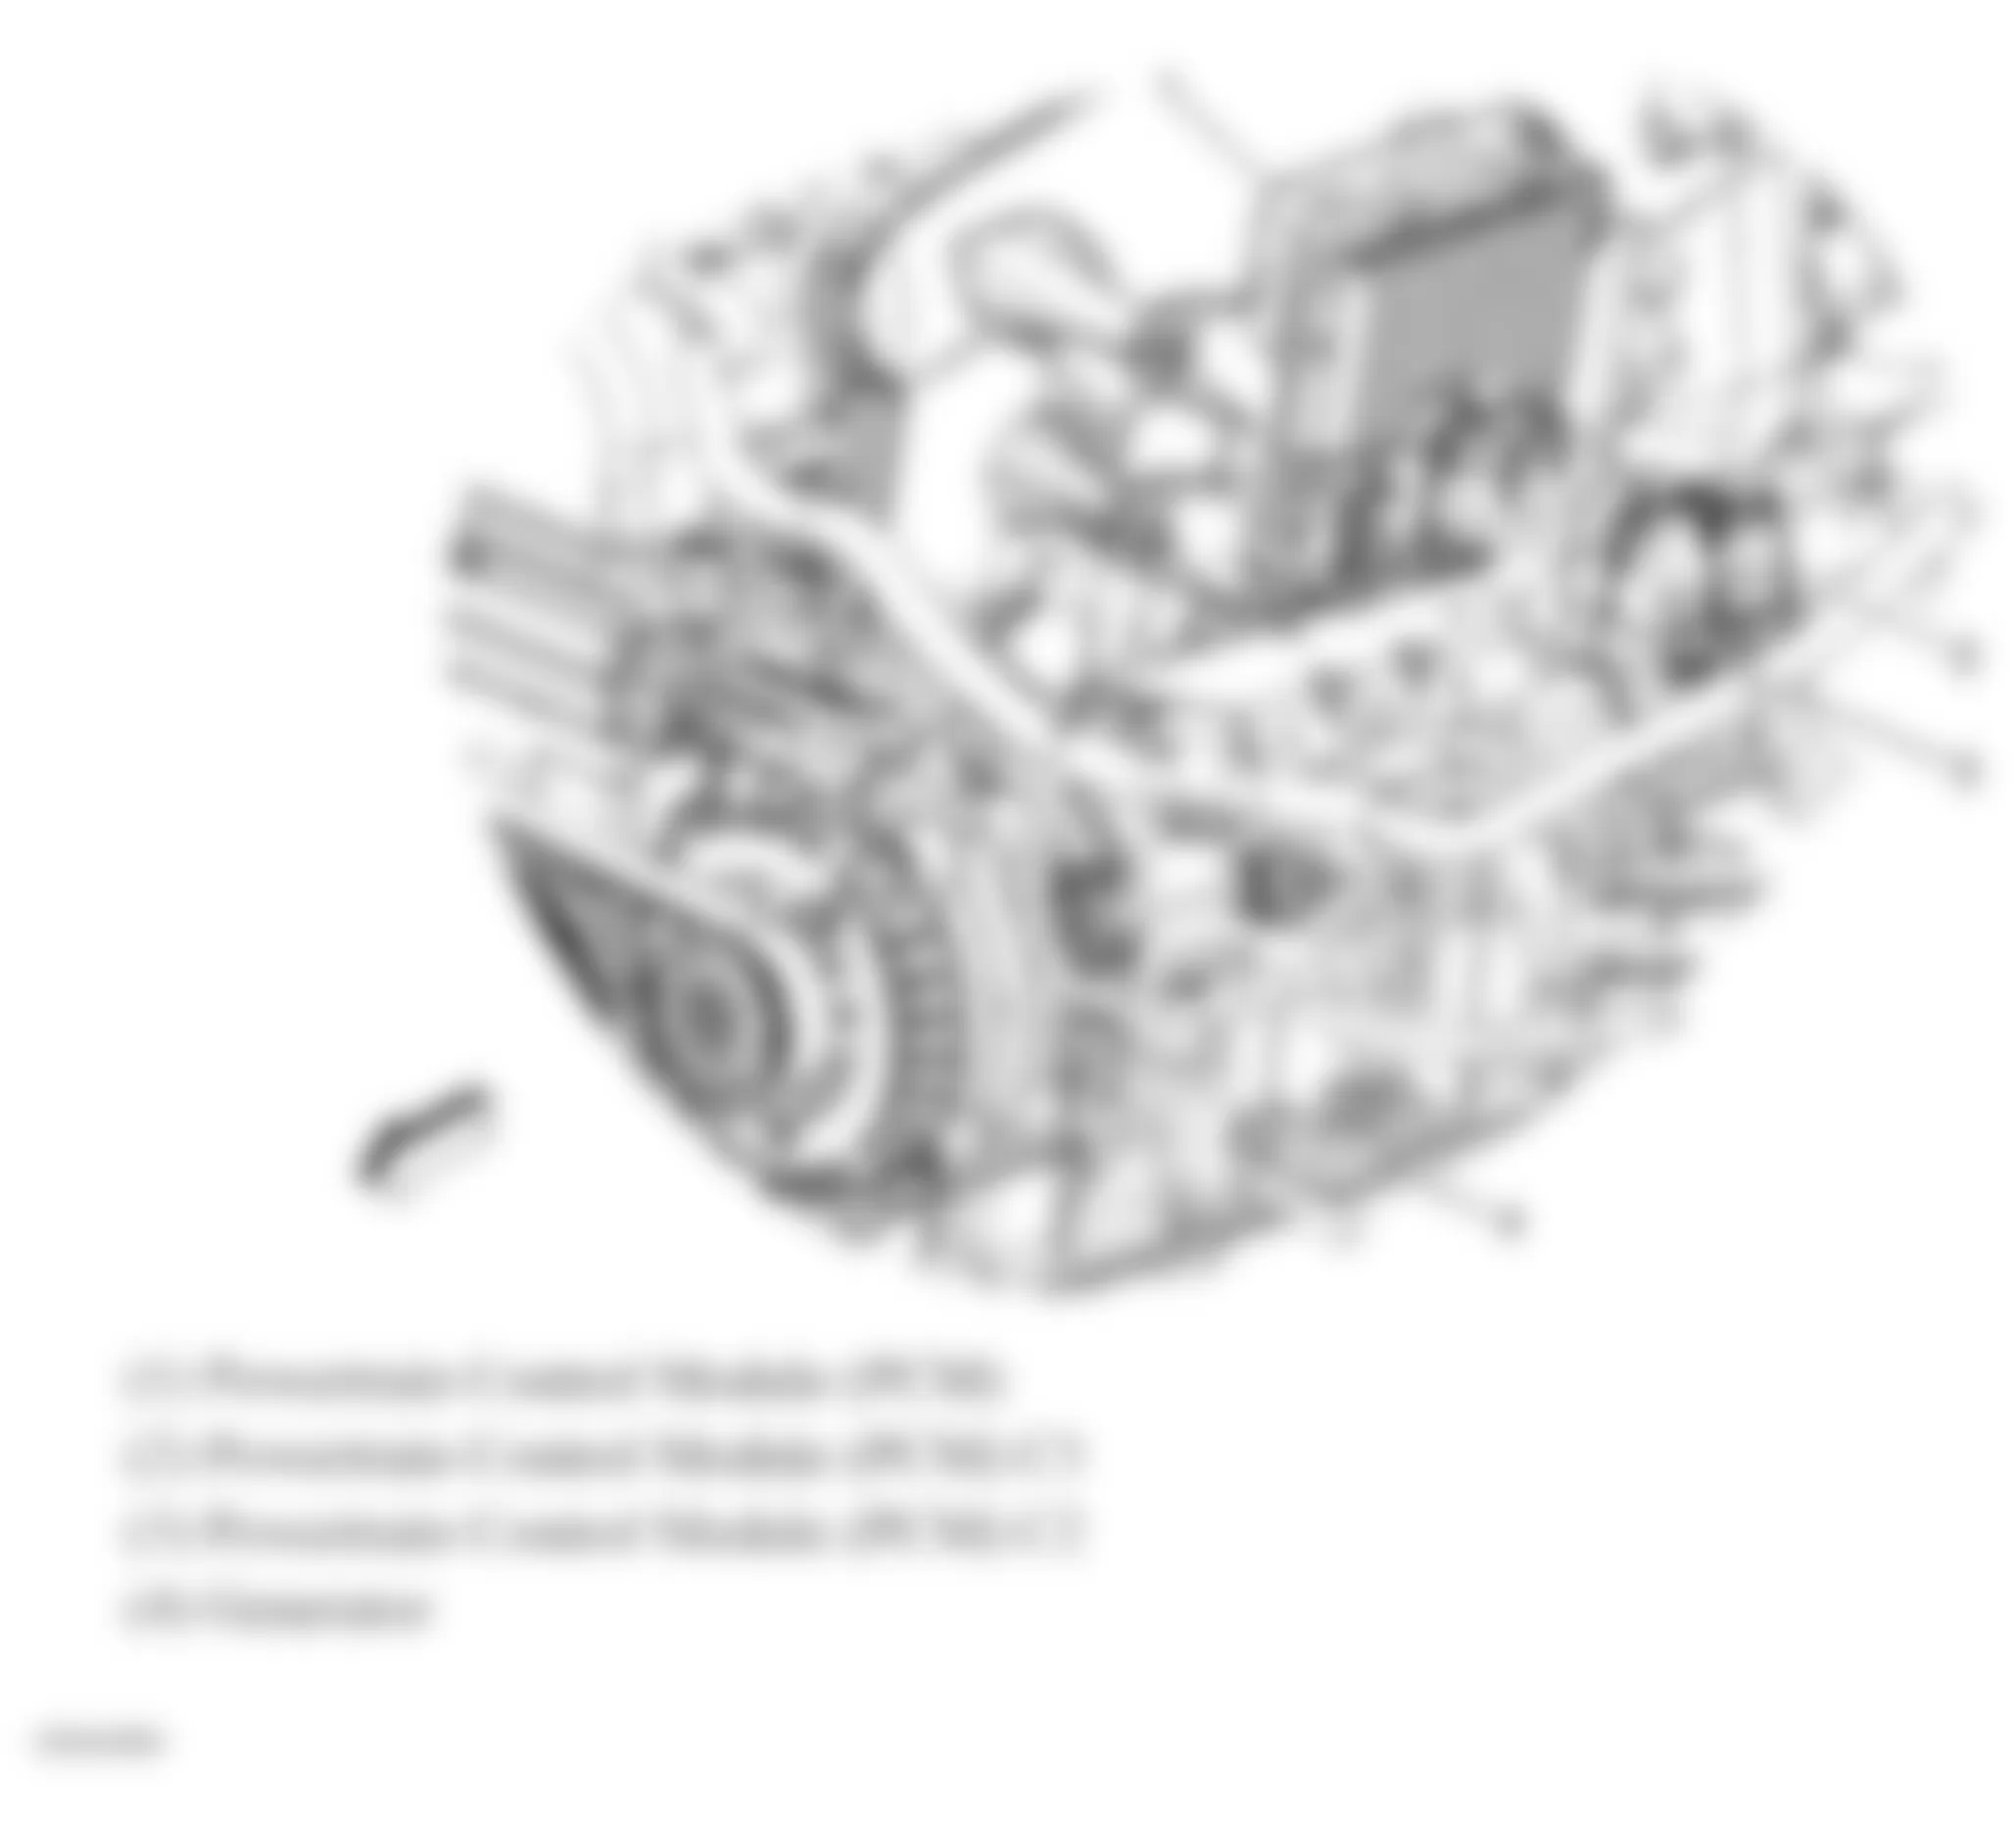 GMC Envoy 2008 - Component Locations -  Upper Left Side Of Engine (4.2L)